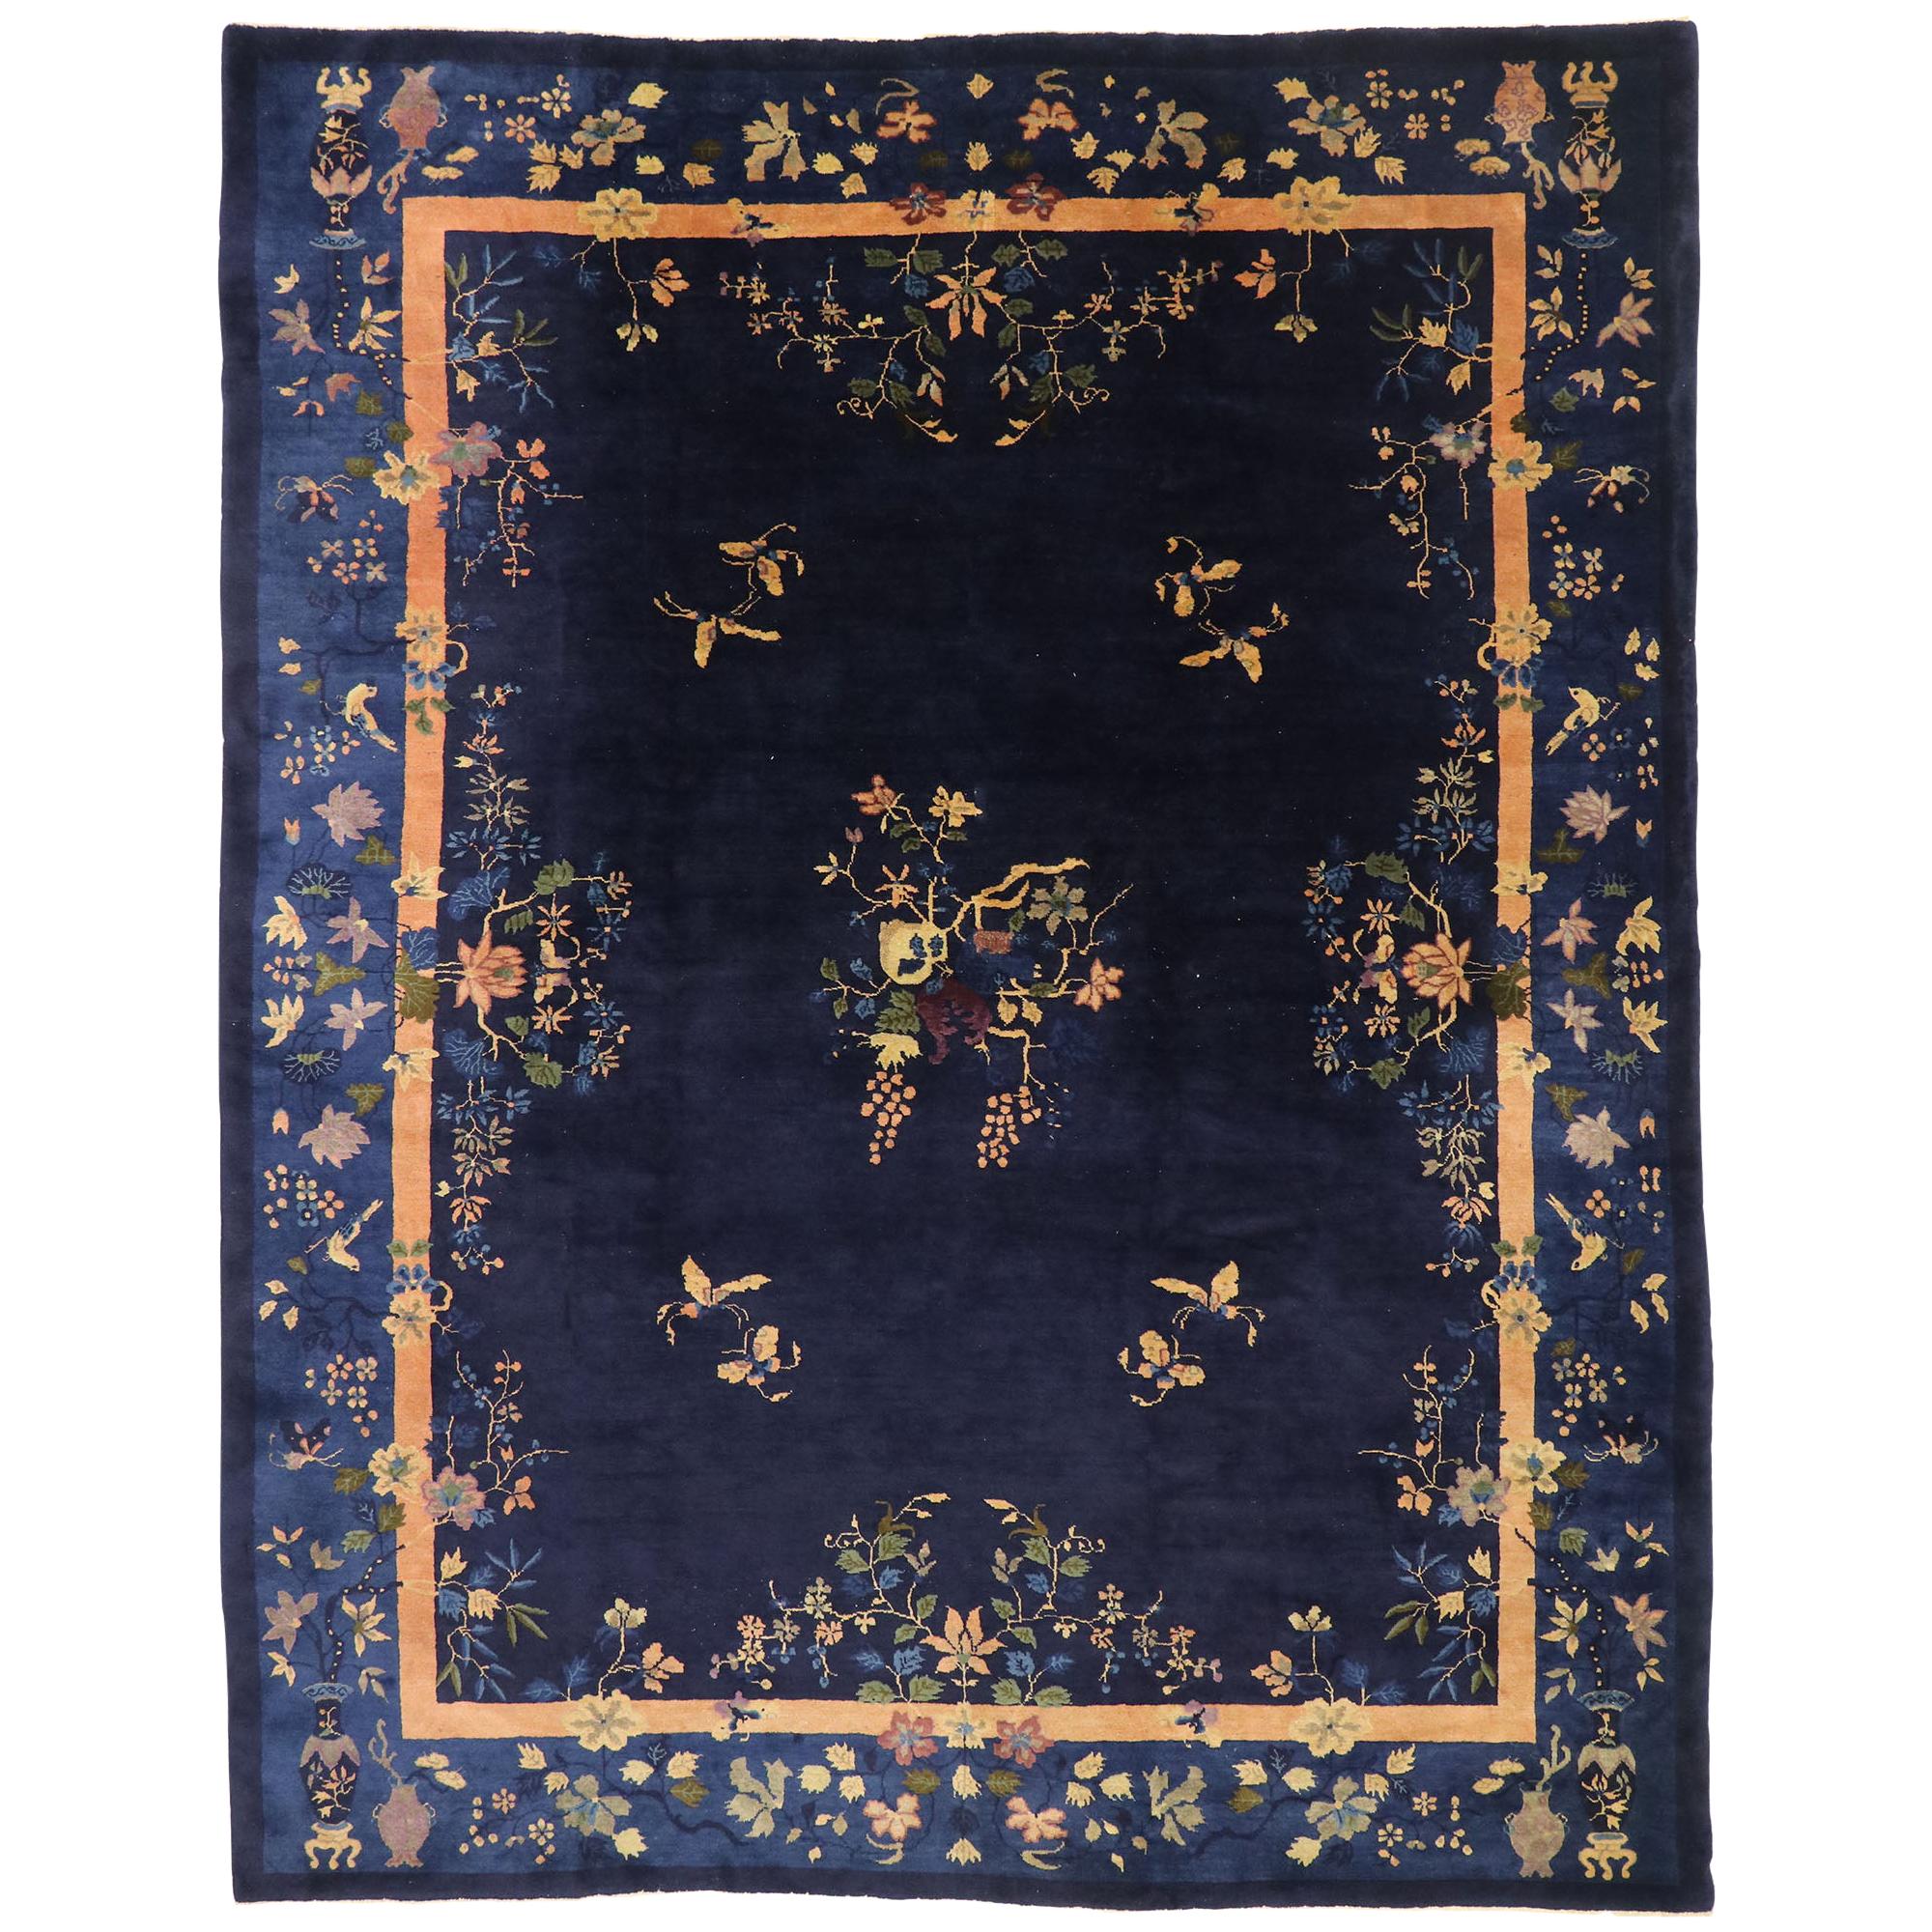 Antique Chinese Peking Rug with Art Deco Style Inspired by Walter Nichols